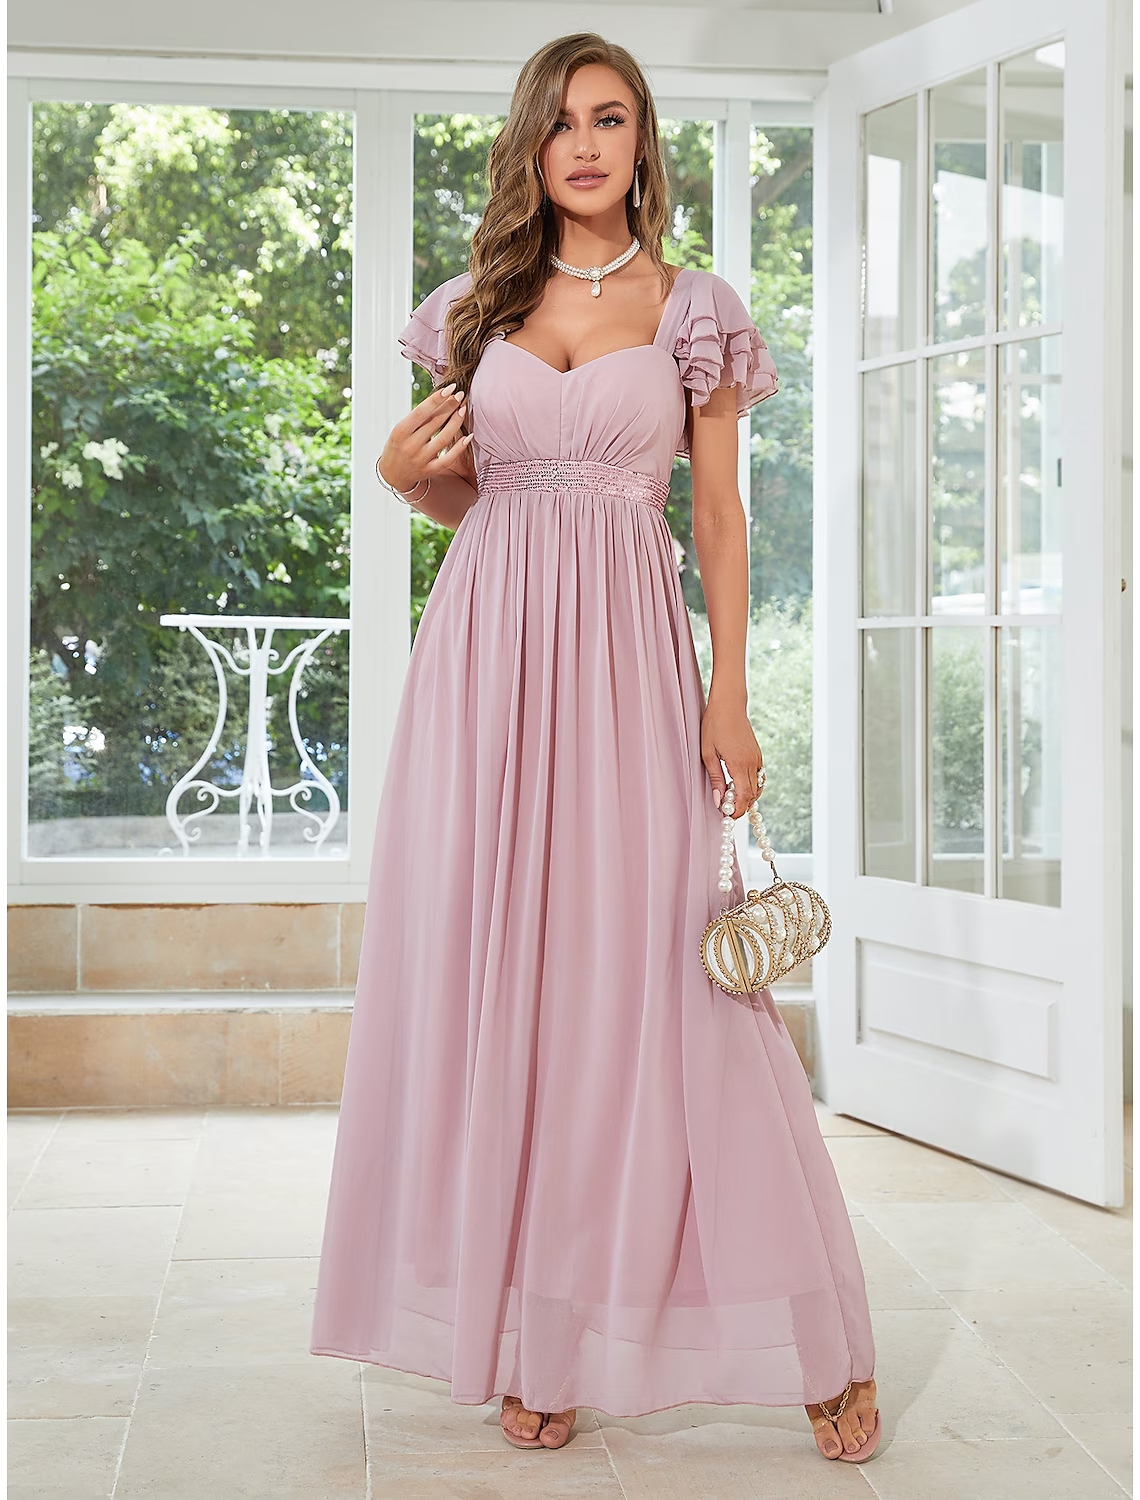 A-Line Wedding Guest Dresses Elegant Dress Party Wear Floor Length Short Sleeve Square Neck Chiffon with Ruffles